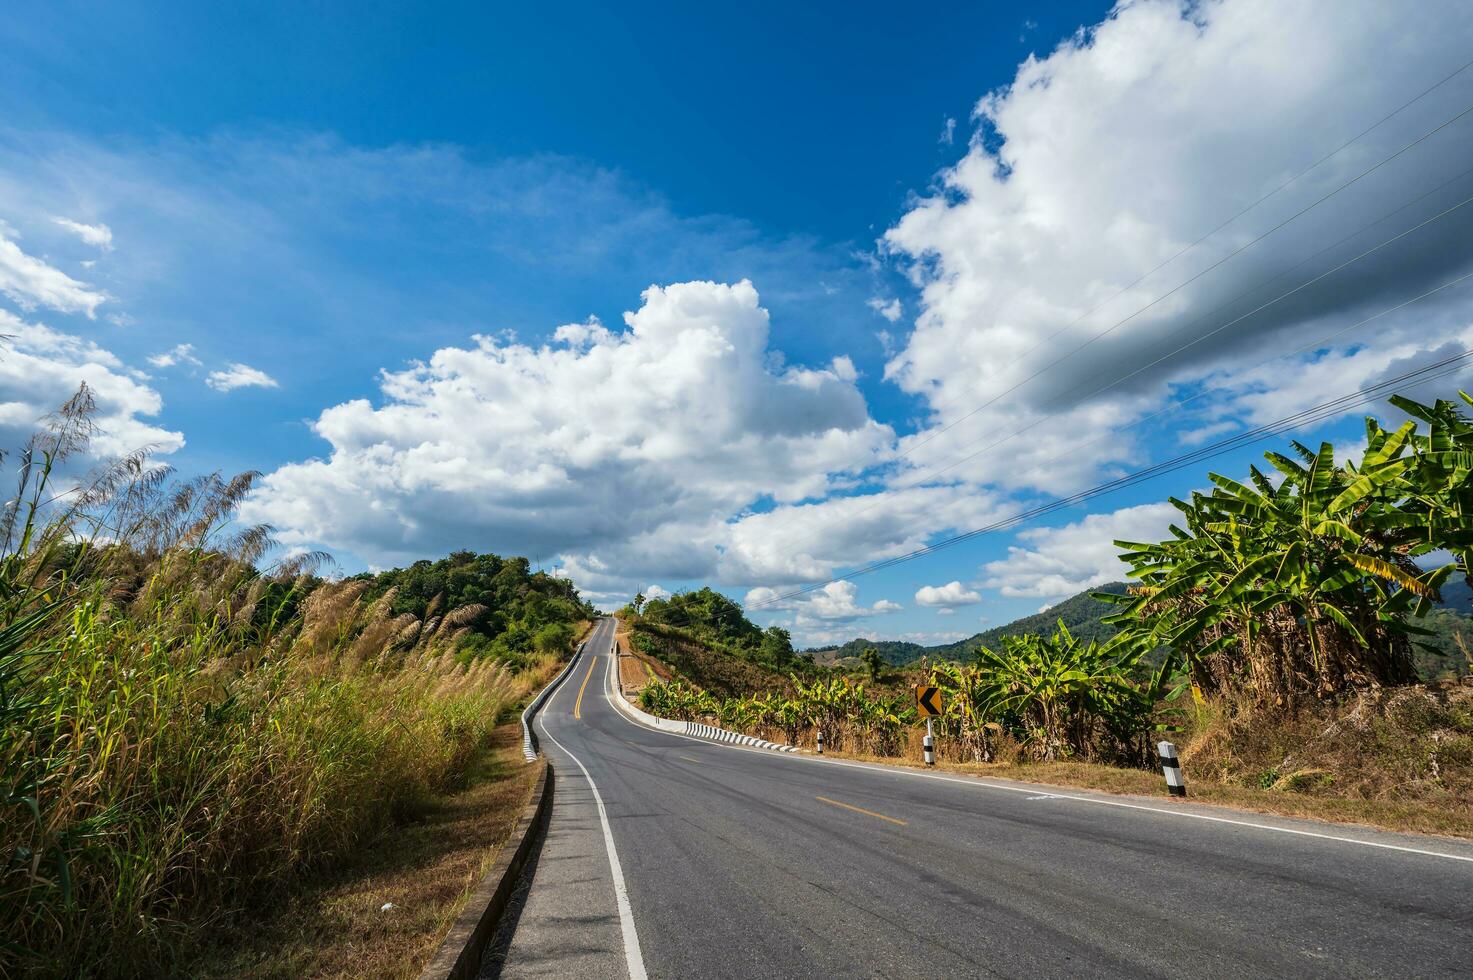 Beautiful road on the mountain in nan city thailand.Nan is a rural province in northern Thailand bordering Laos photo